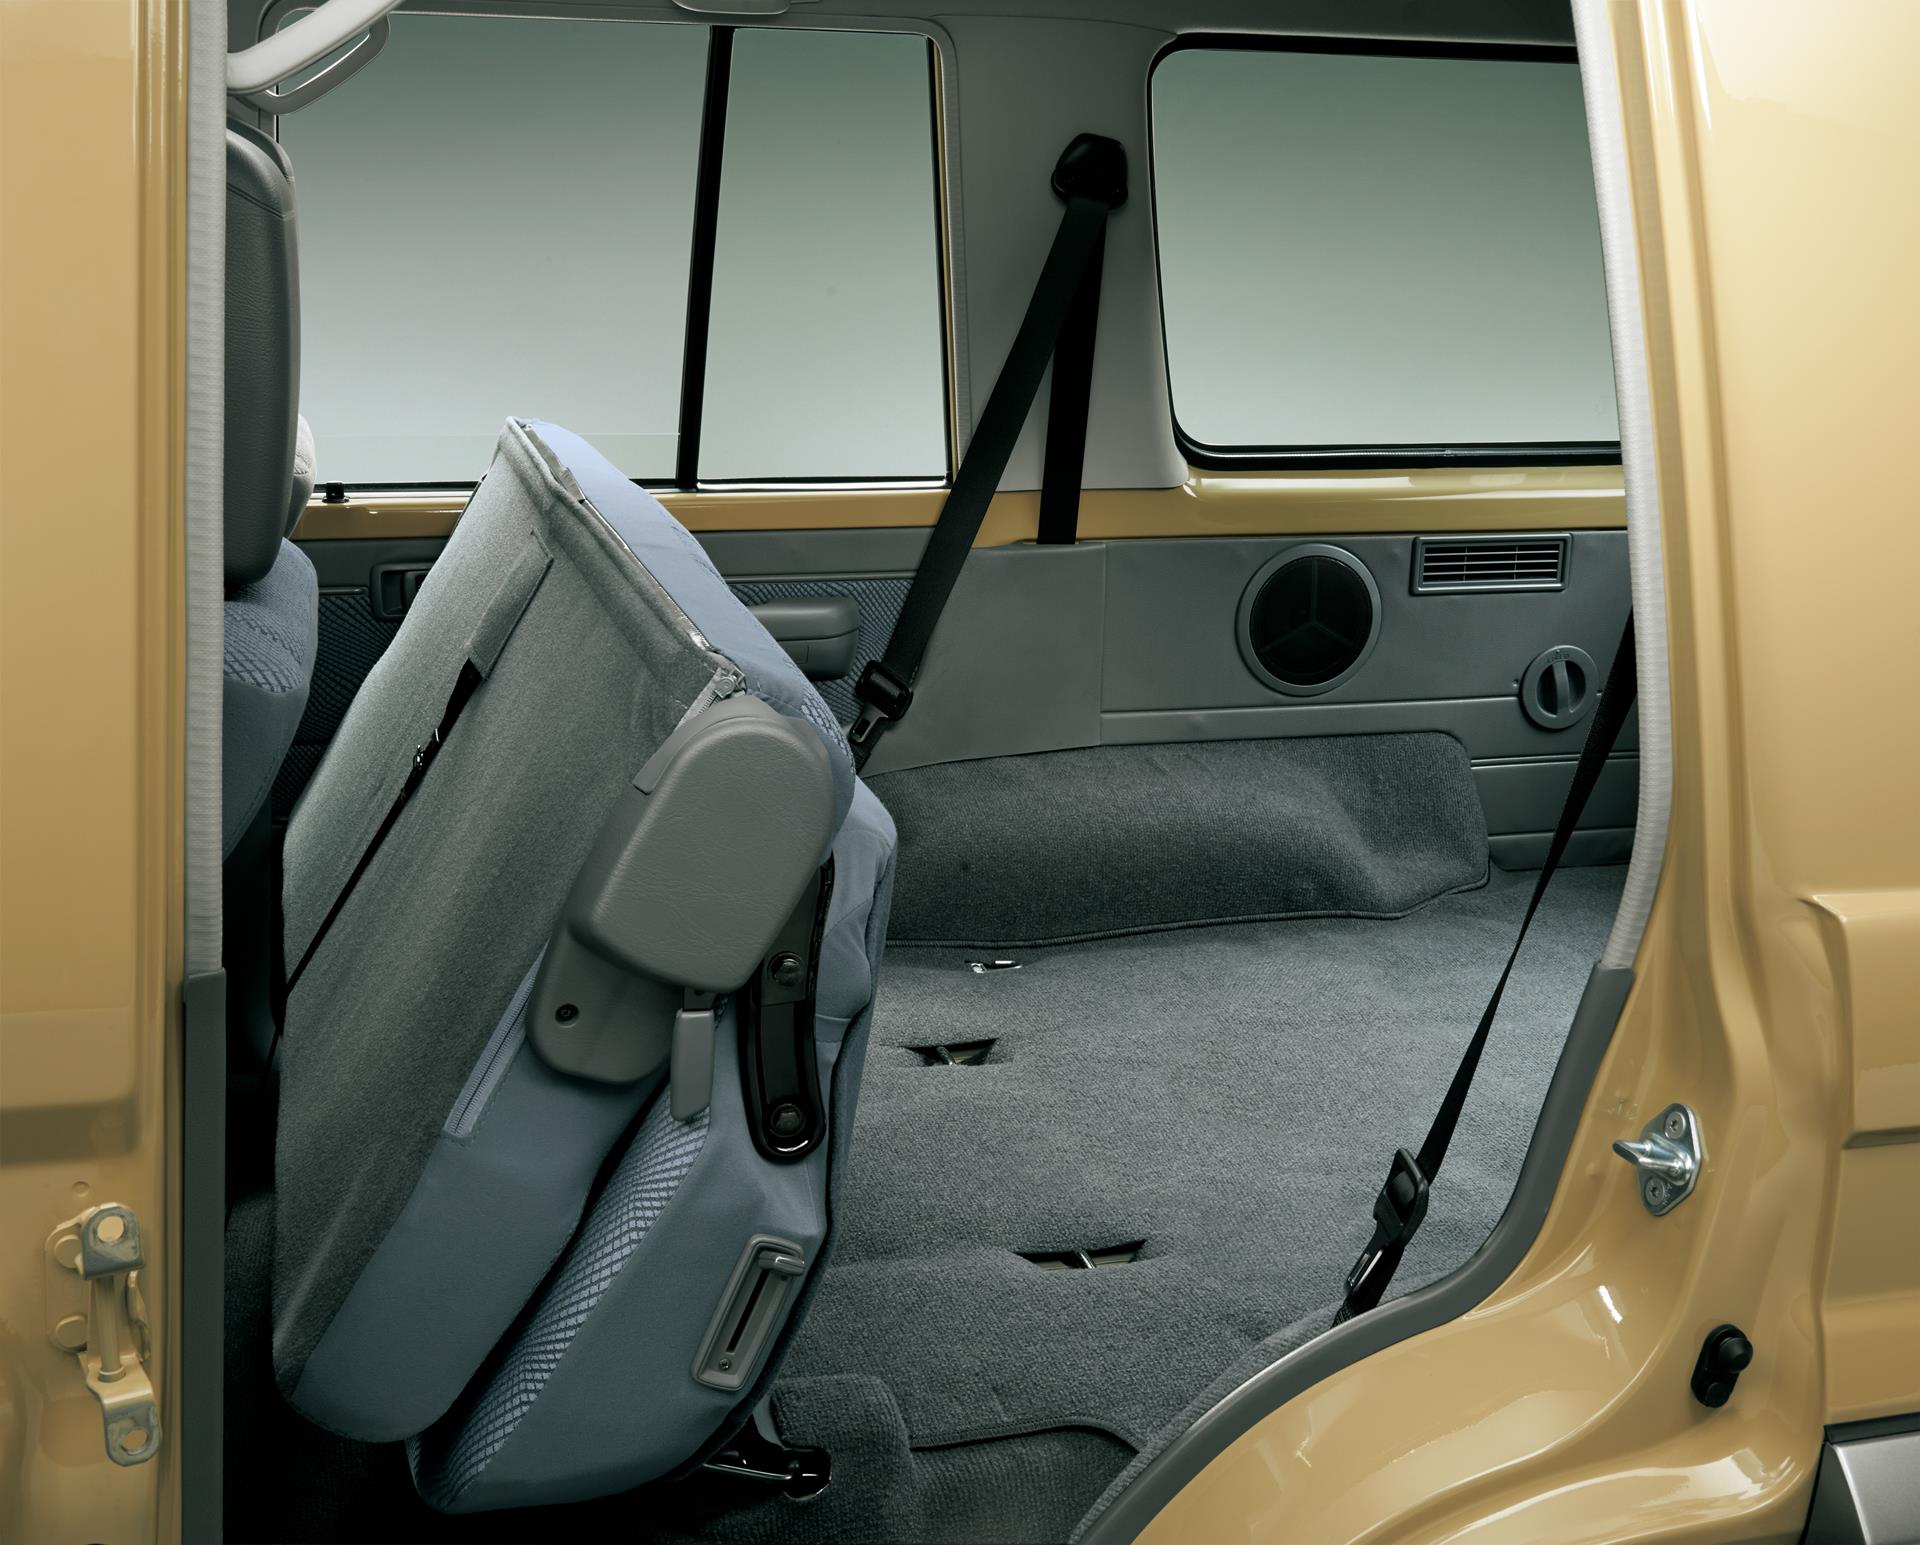 Land Cruiser 70 van rear bench seats in stowed position (Japan commemorative re-release)